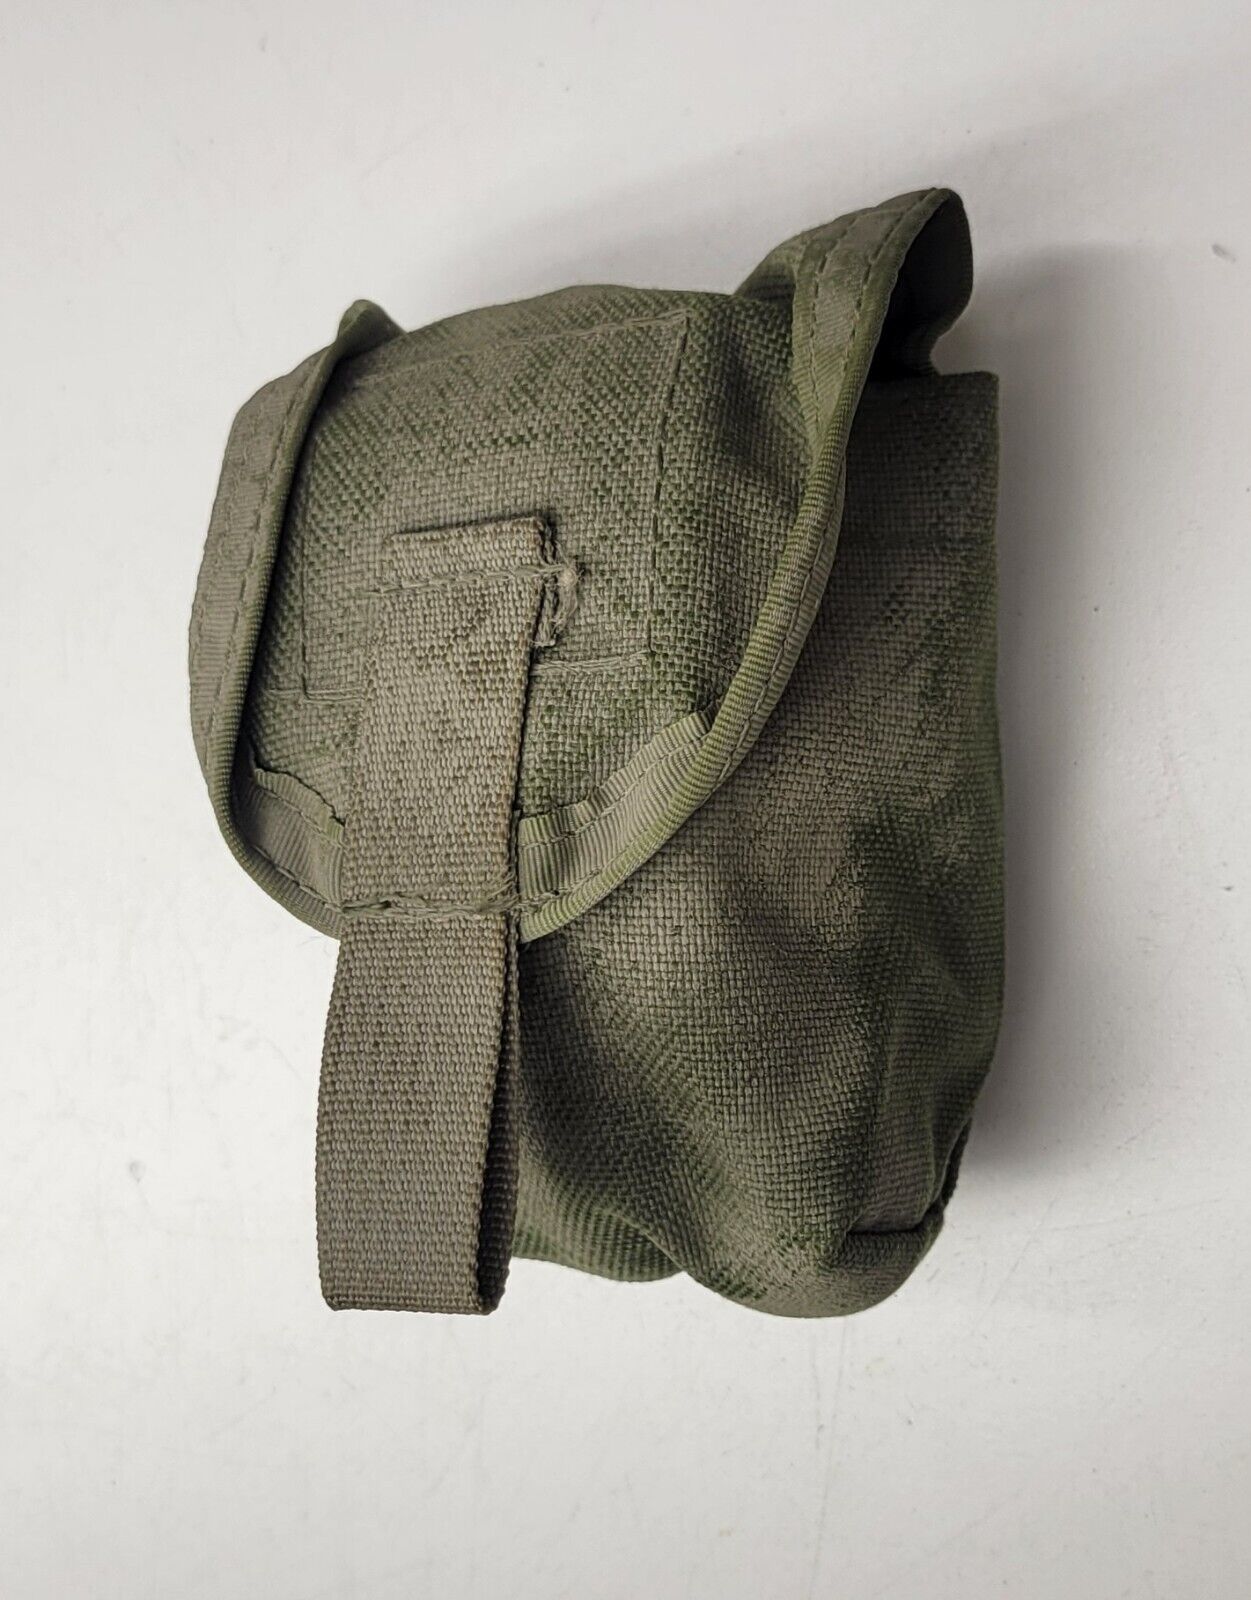 TACTICAL TAILOR OD TAN FDE GRENADE POUCH MOLLE OLD SCHOOL